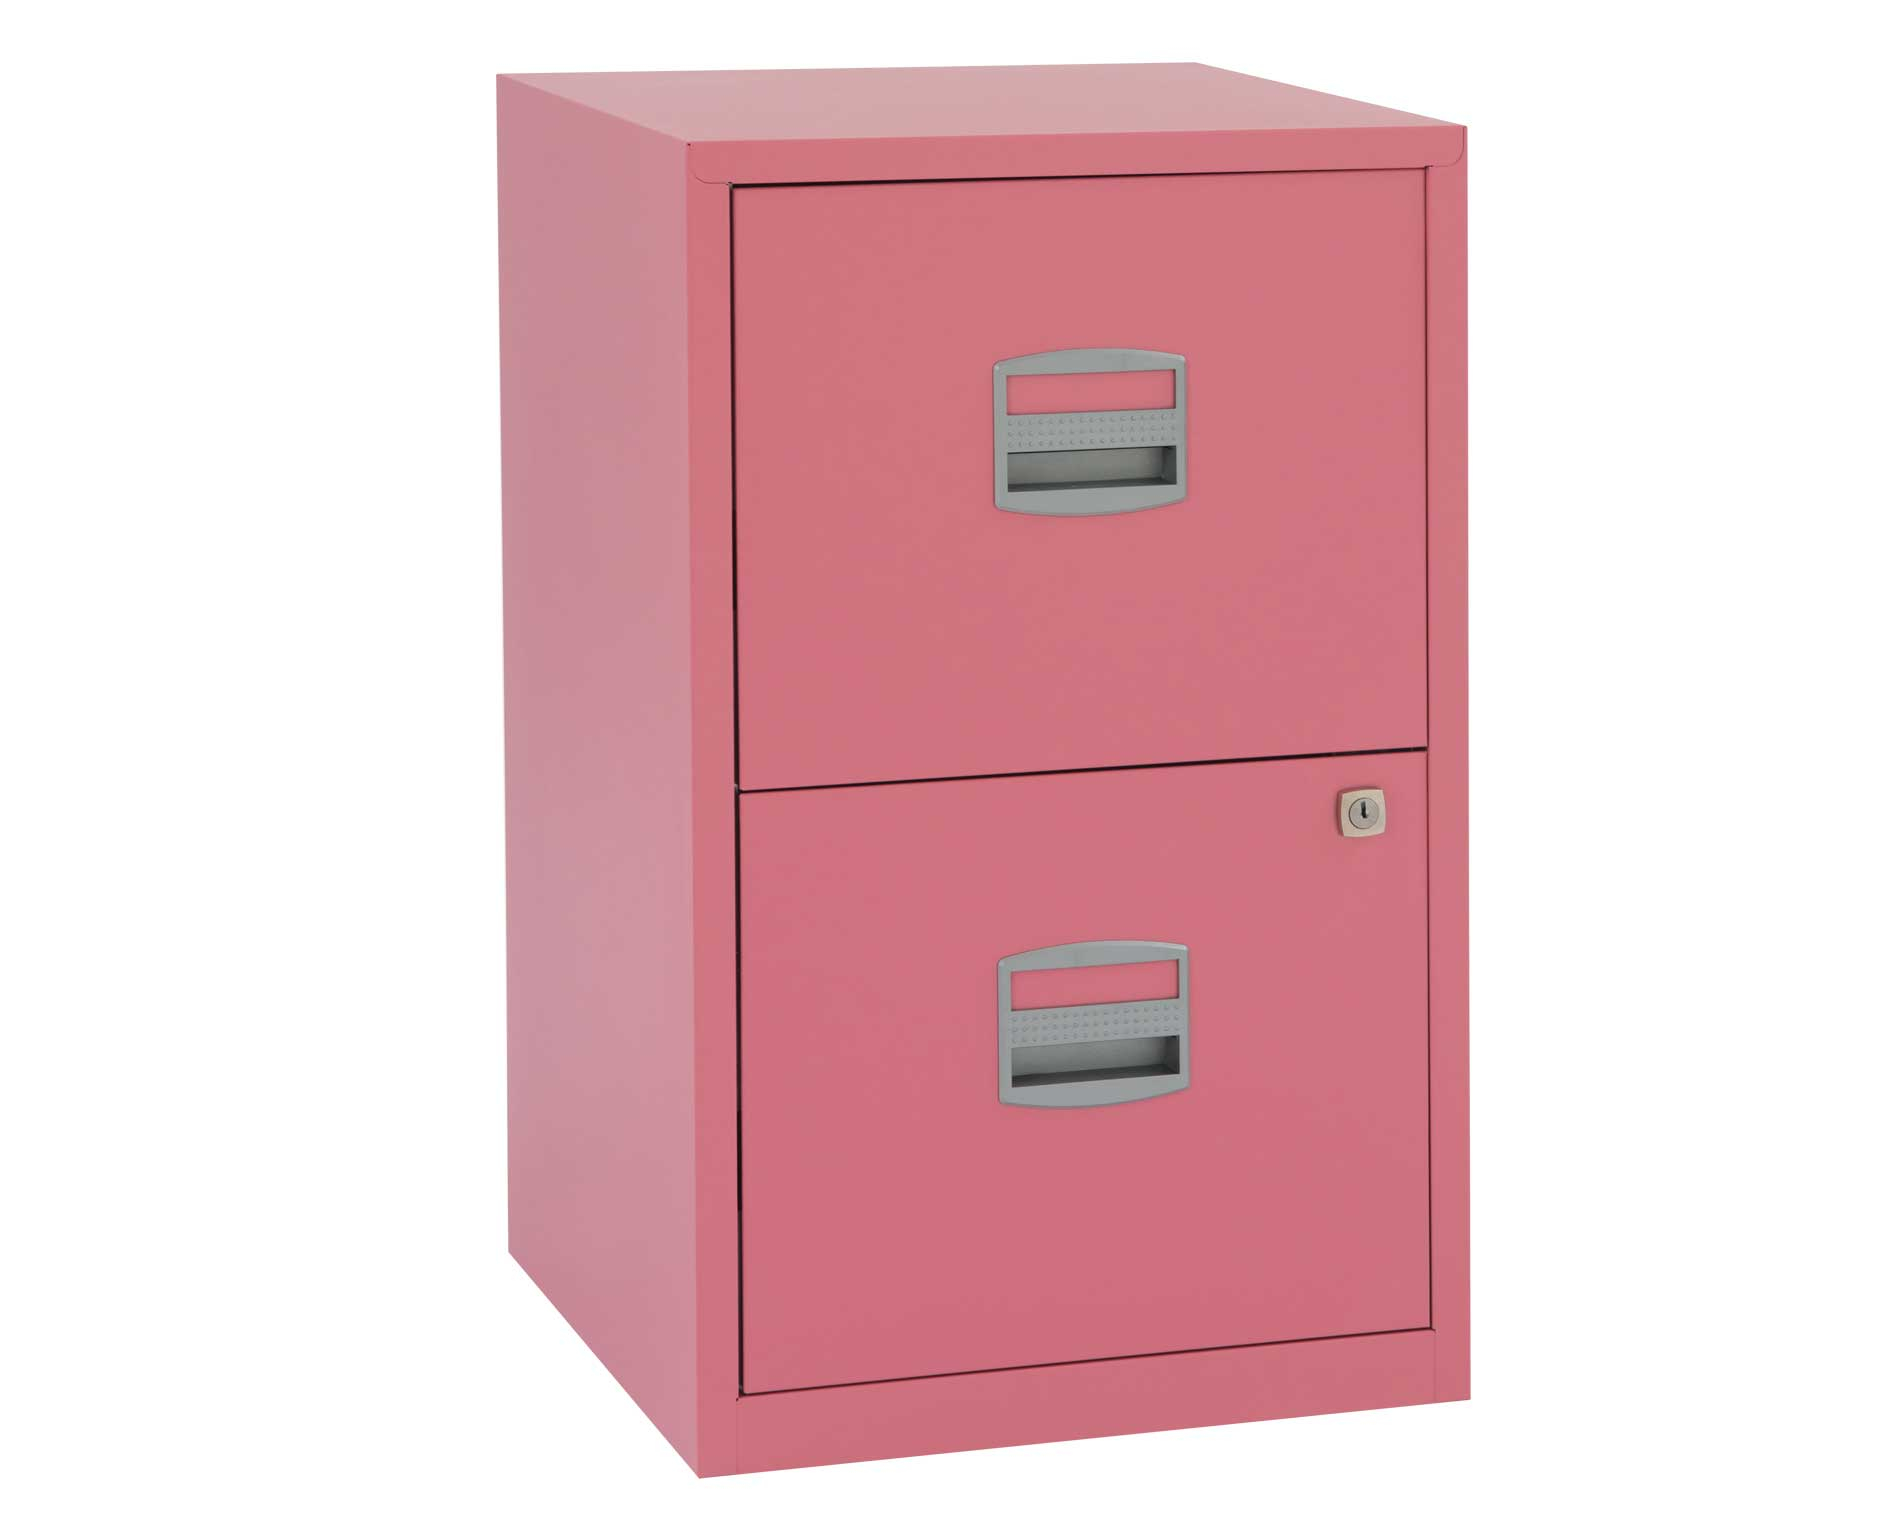 Pink Filing Cabinets Storage Shelving Furniture Storage Ryman pertaining to dimensions 1890 X 1540